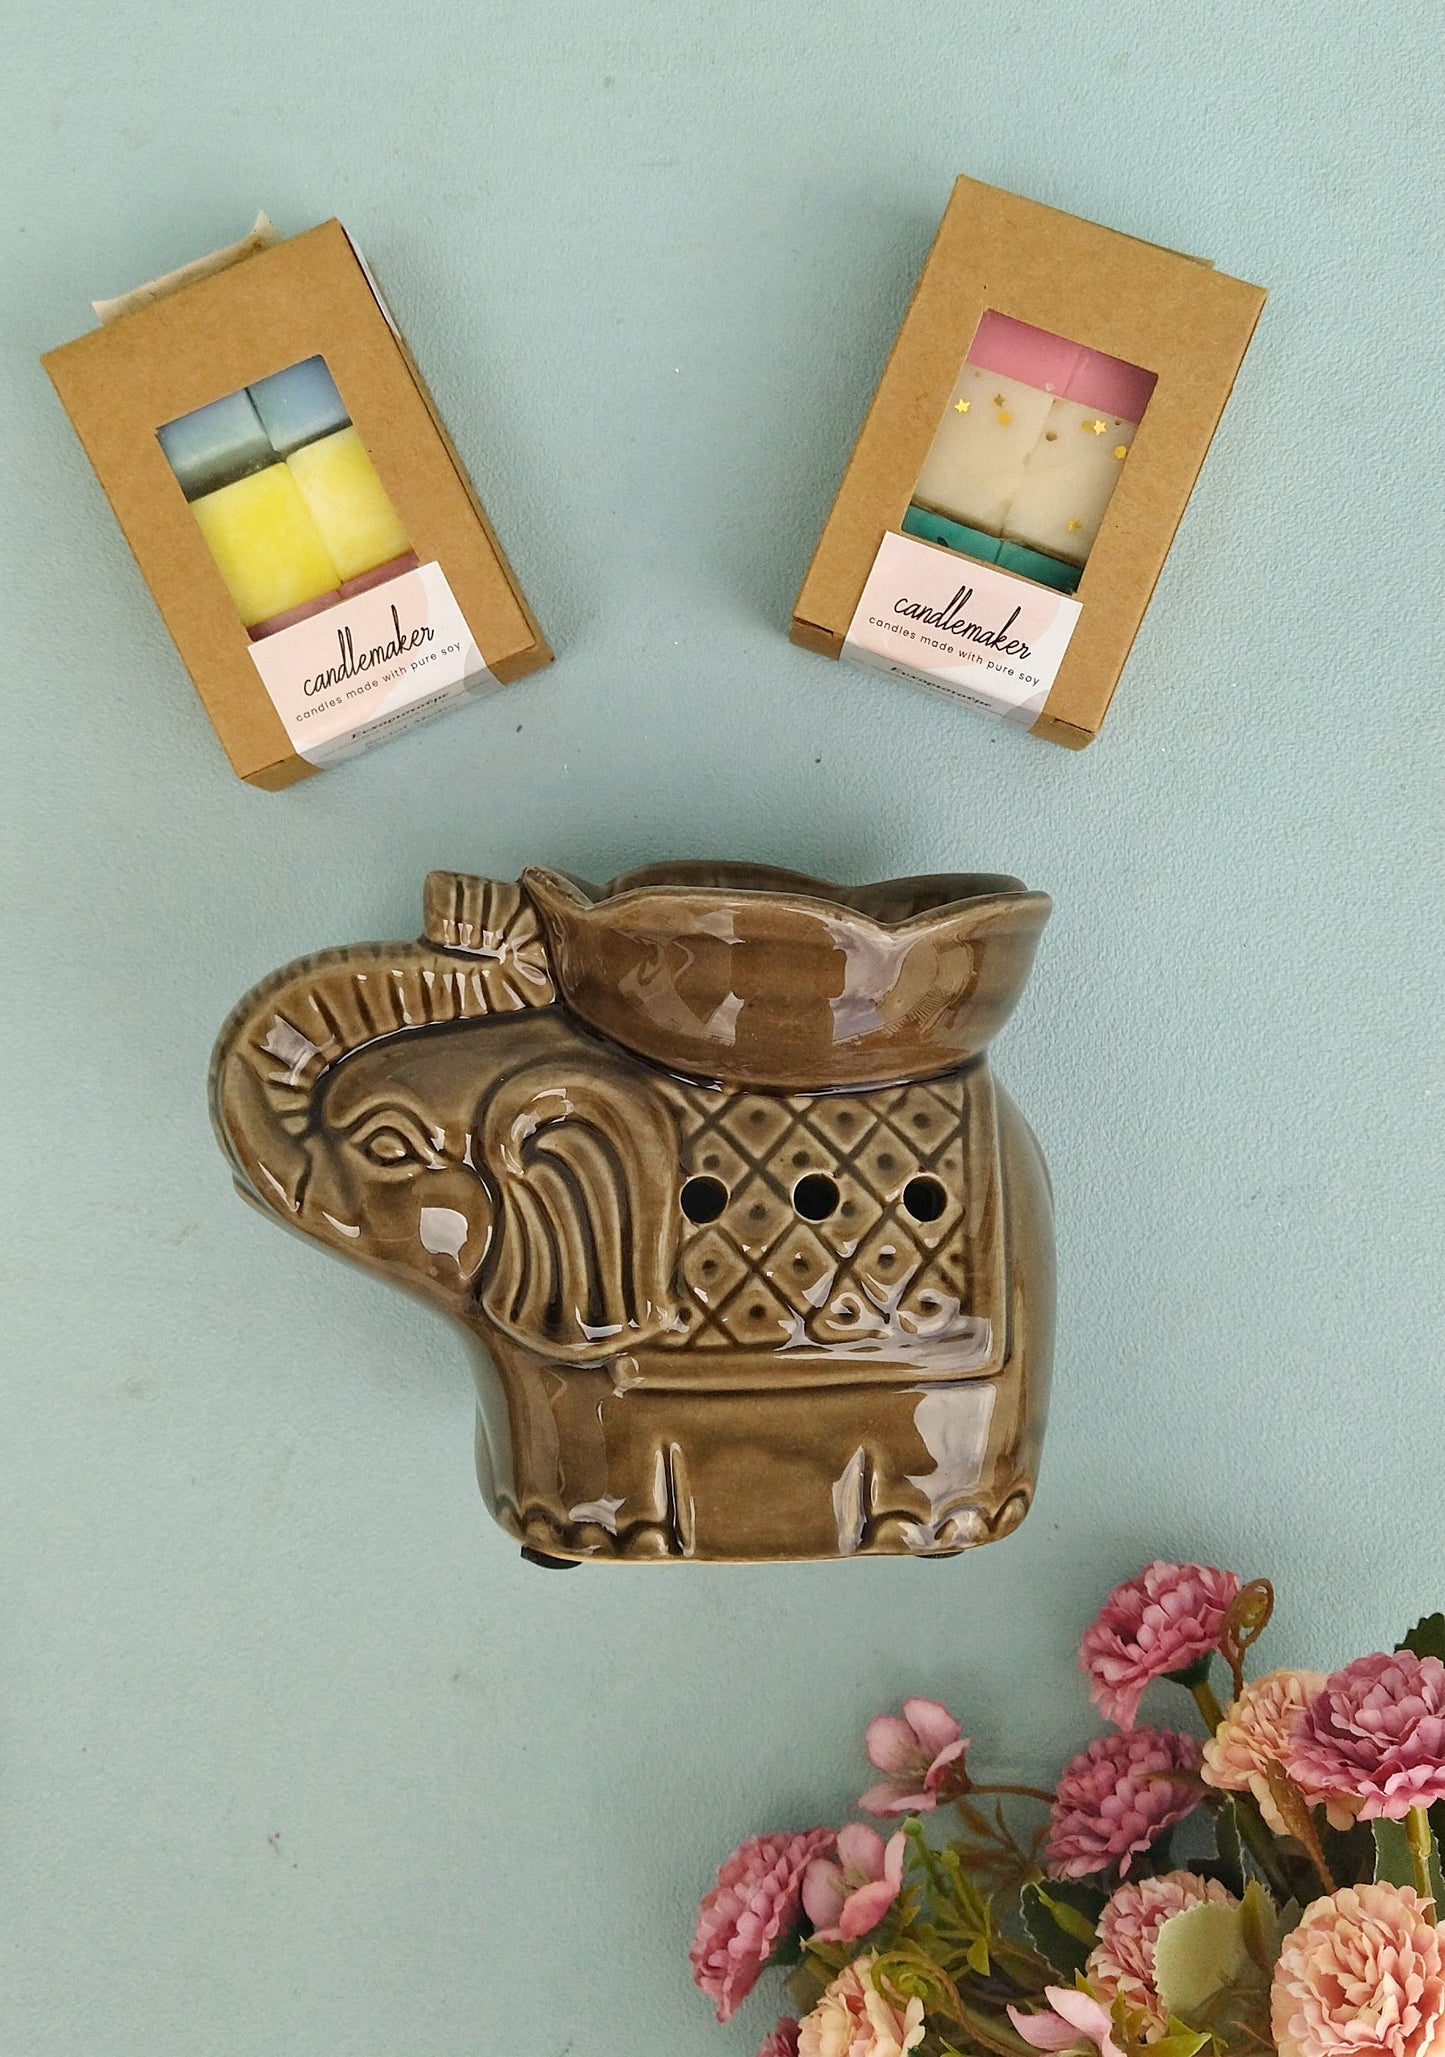 Ceramic Elephant Oil Diffuser, Wax Melter Gift Set With Soy Wax Melts